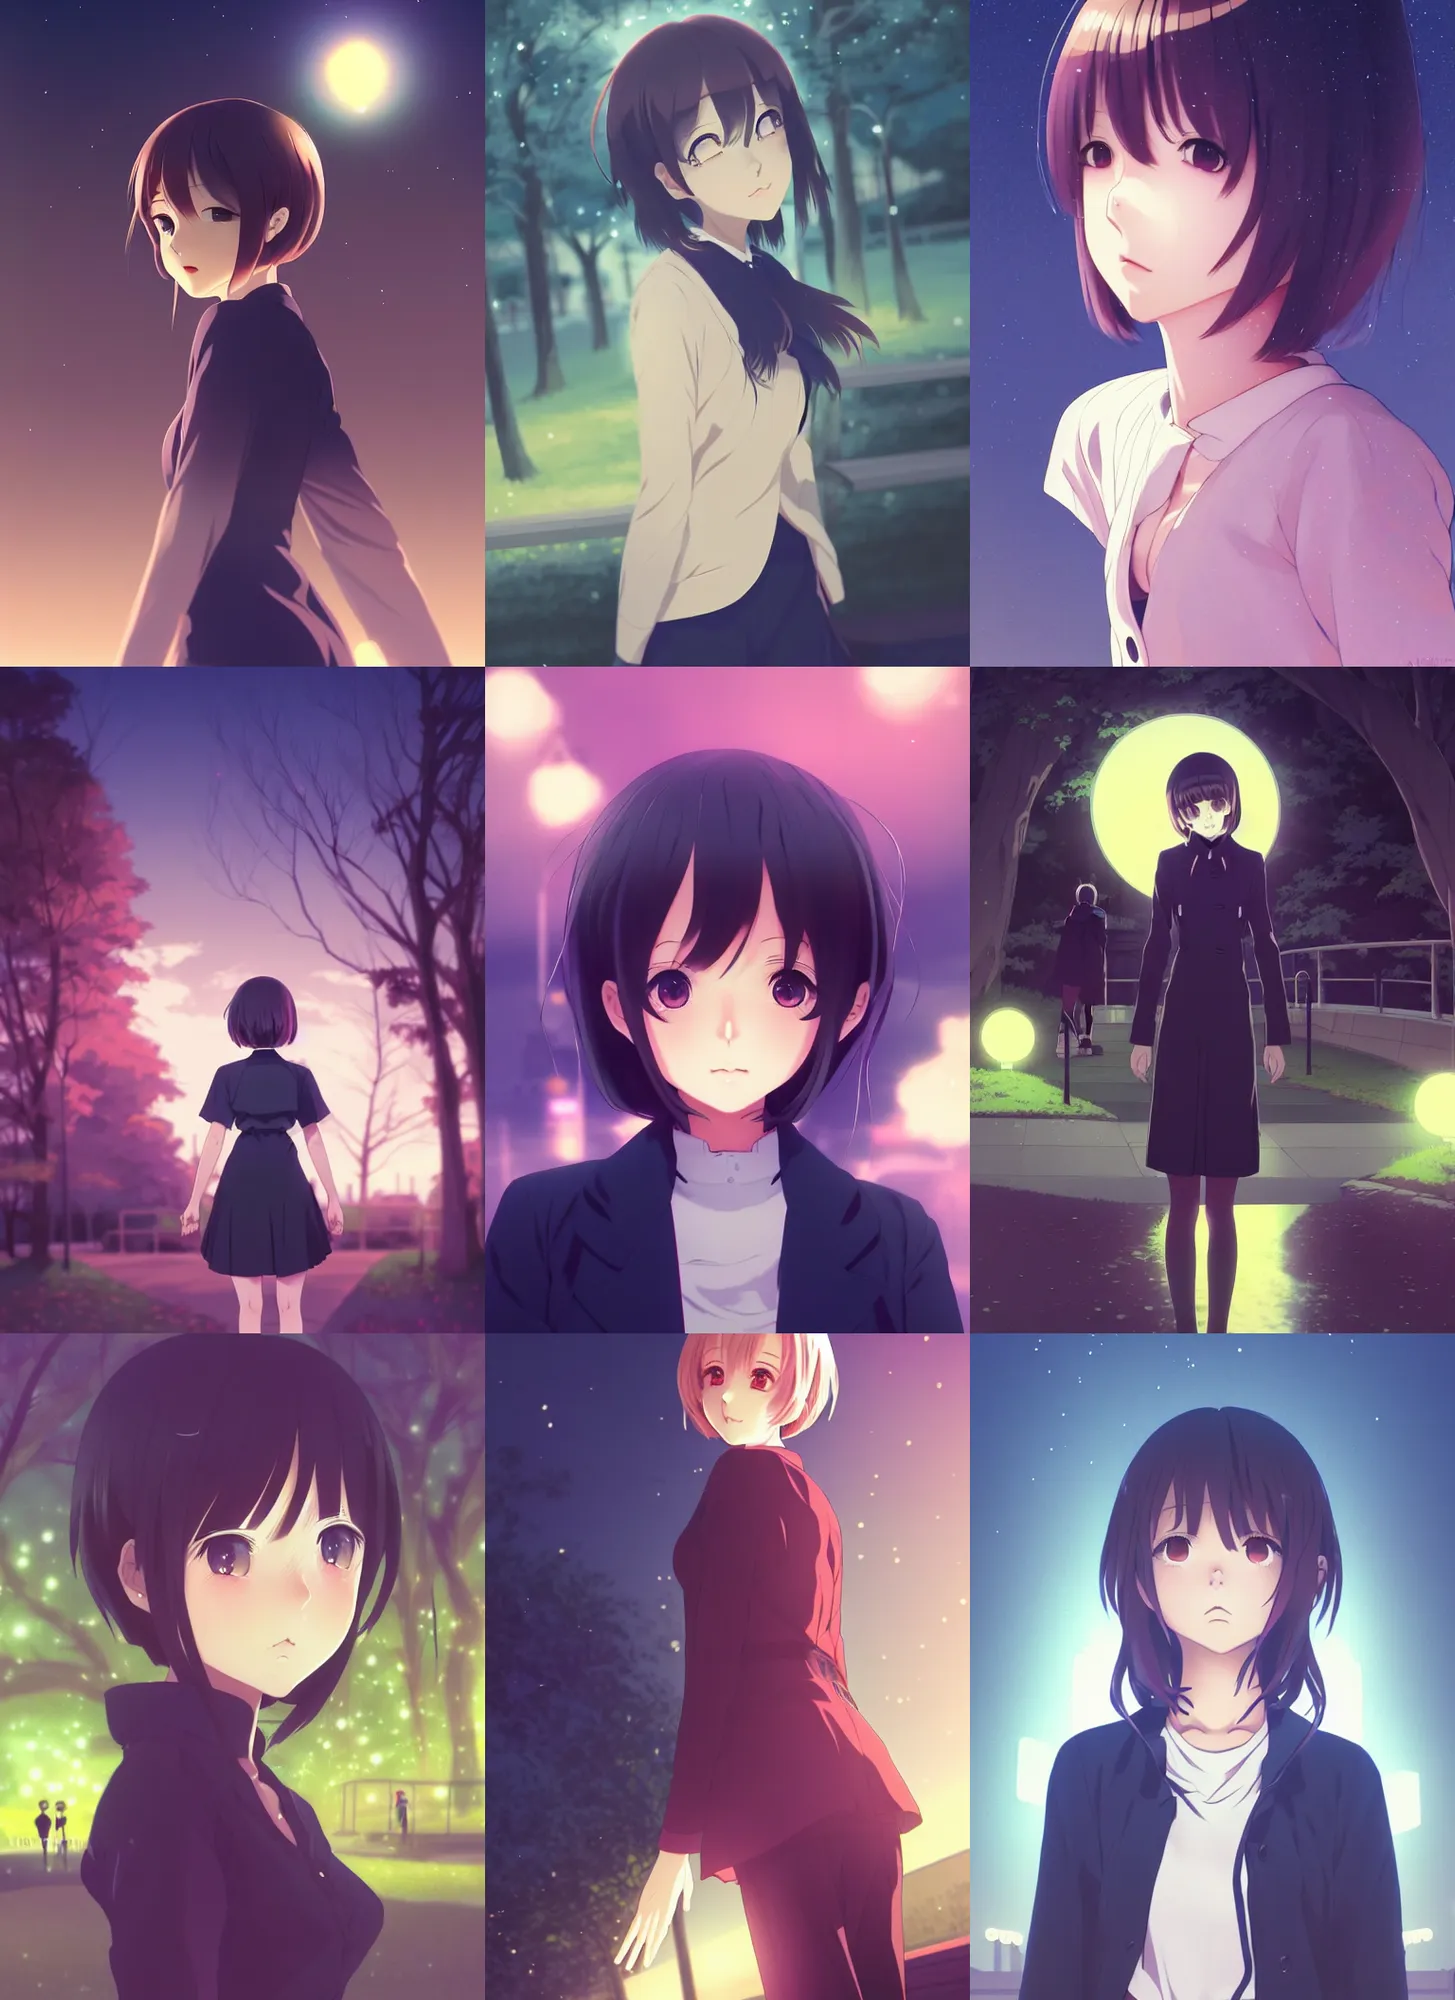 Prompt: anime visual, portrait of a young female at the park at night, low light, cute face by ilya kuvshinov, yoh yoshinari, makoto shinkai, dynamic pose, dynamic perspective, muted colors, cel shaded, flat shading mucha, rounded eyes, moody, detailed facial features, psycho pass